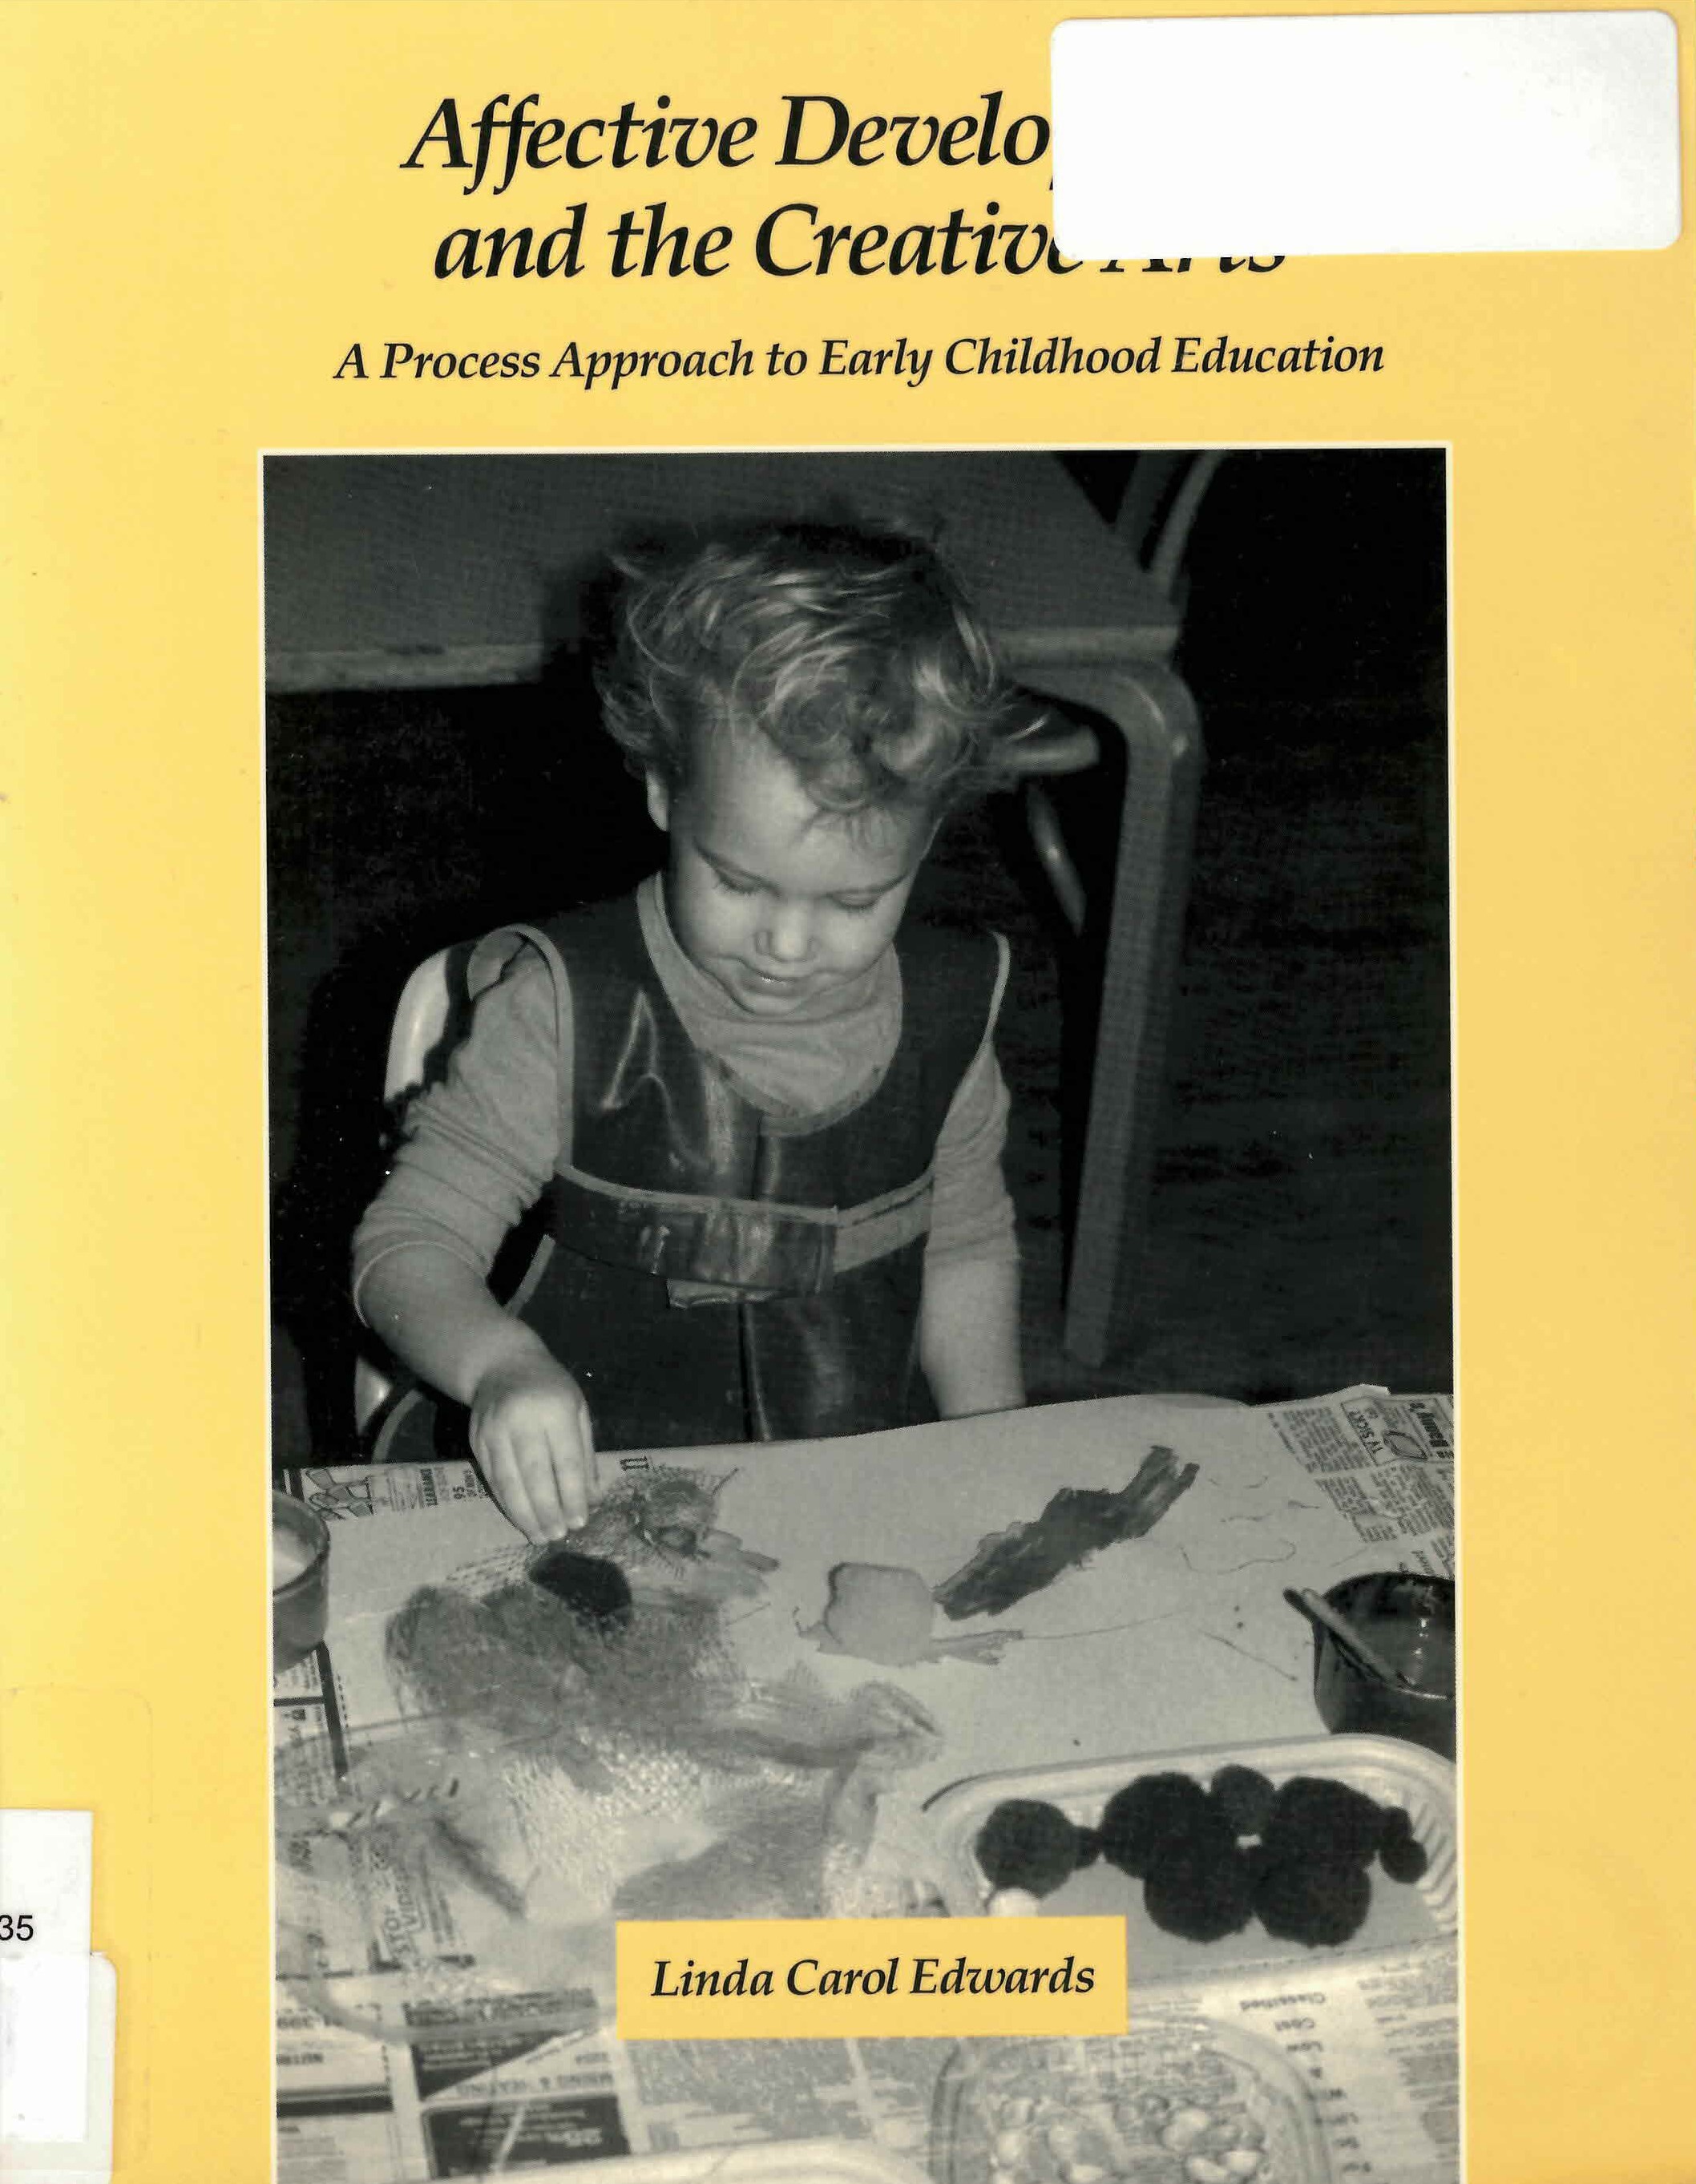 Affective development and the creative arts : a process approach to early childhood education